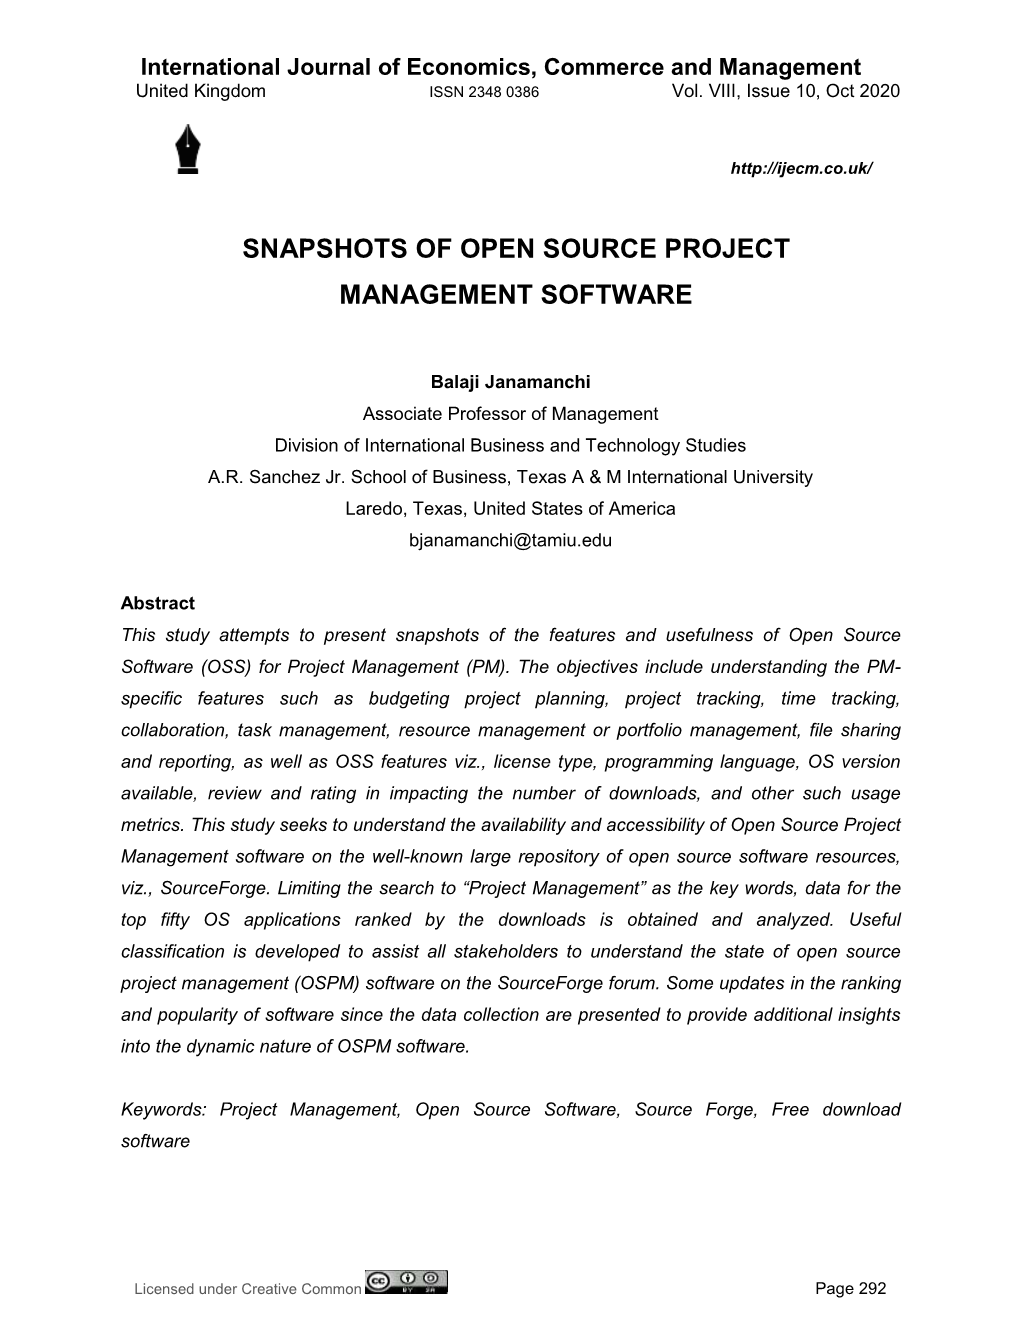 Snapshots of Open Source Project Management Software